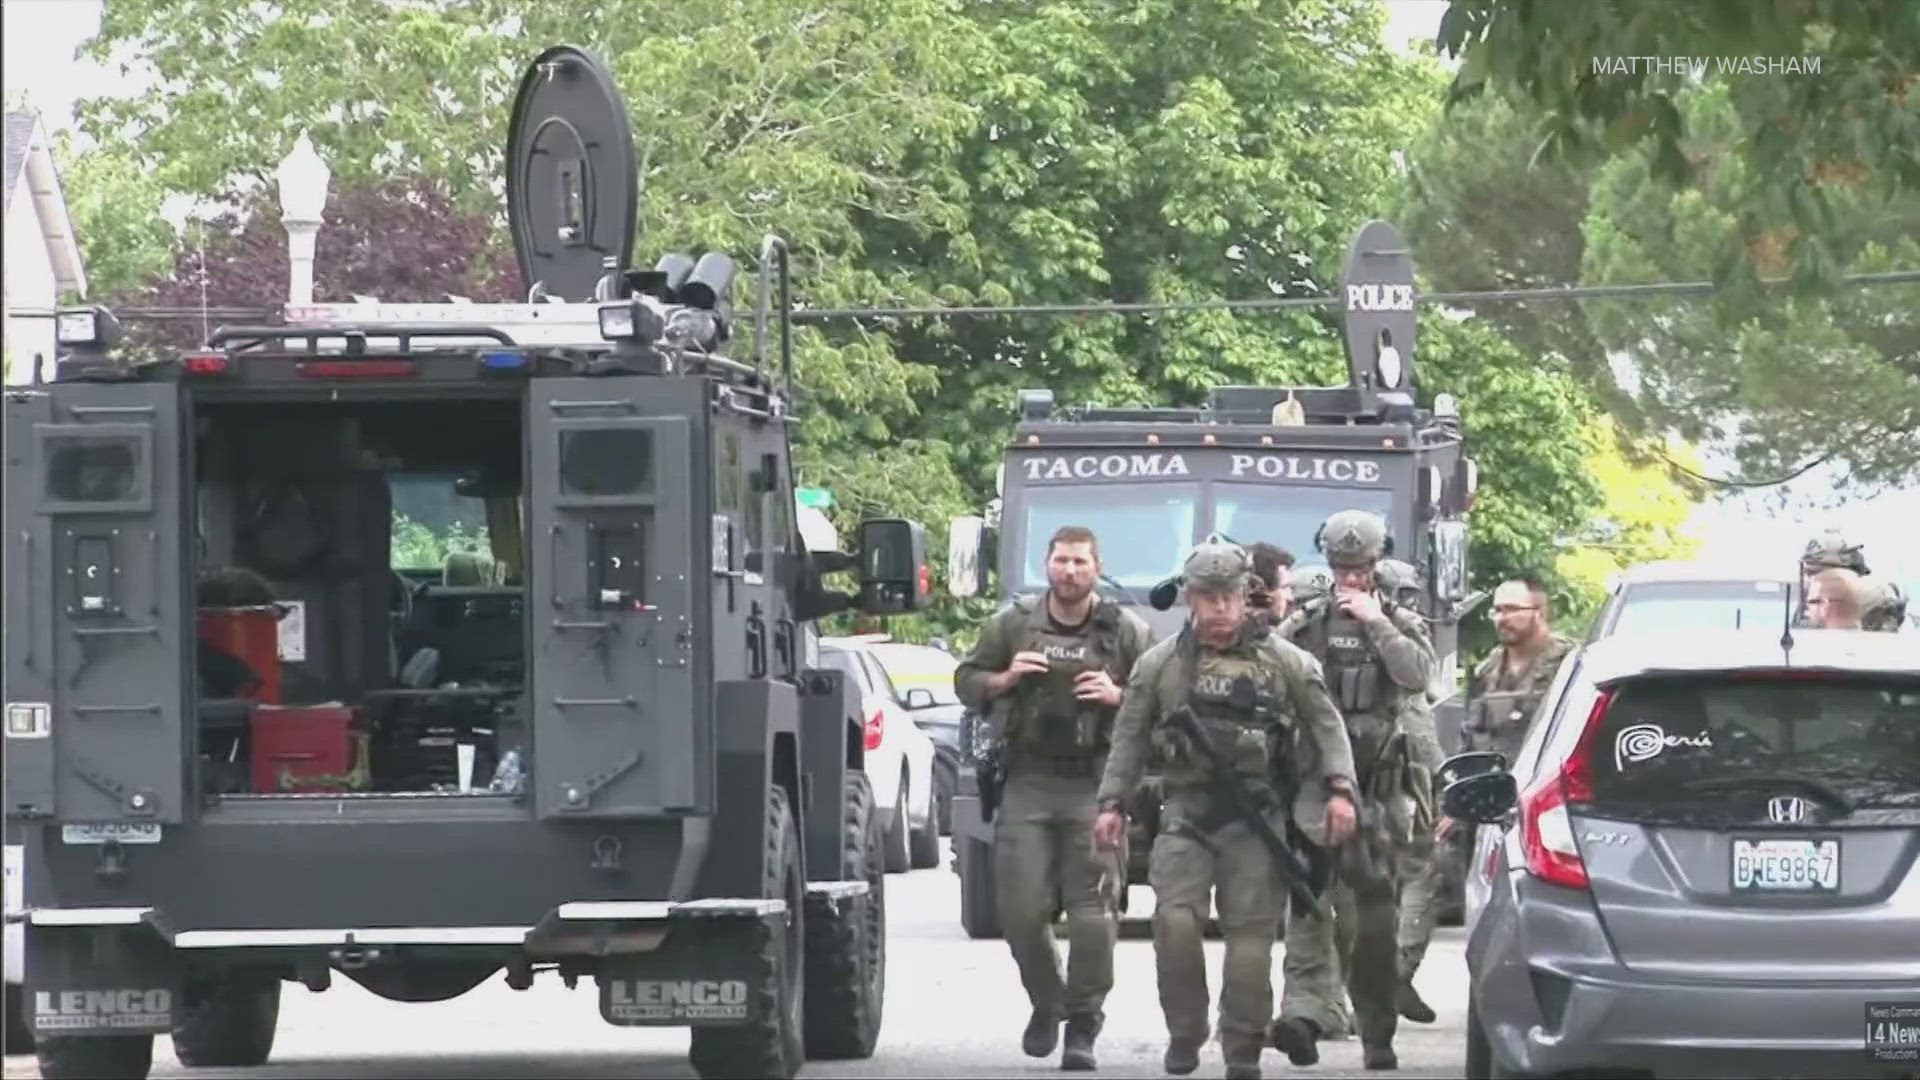 An apparent home invasion led to a standoff with a Tacoma SWAT team. Police found two people shot inside a home after a standoff. No shots were fired by police.